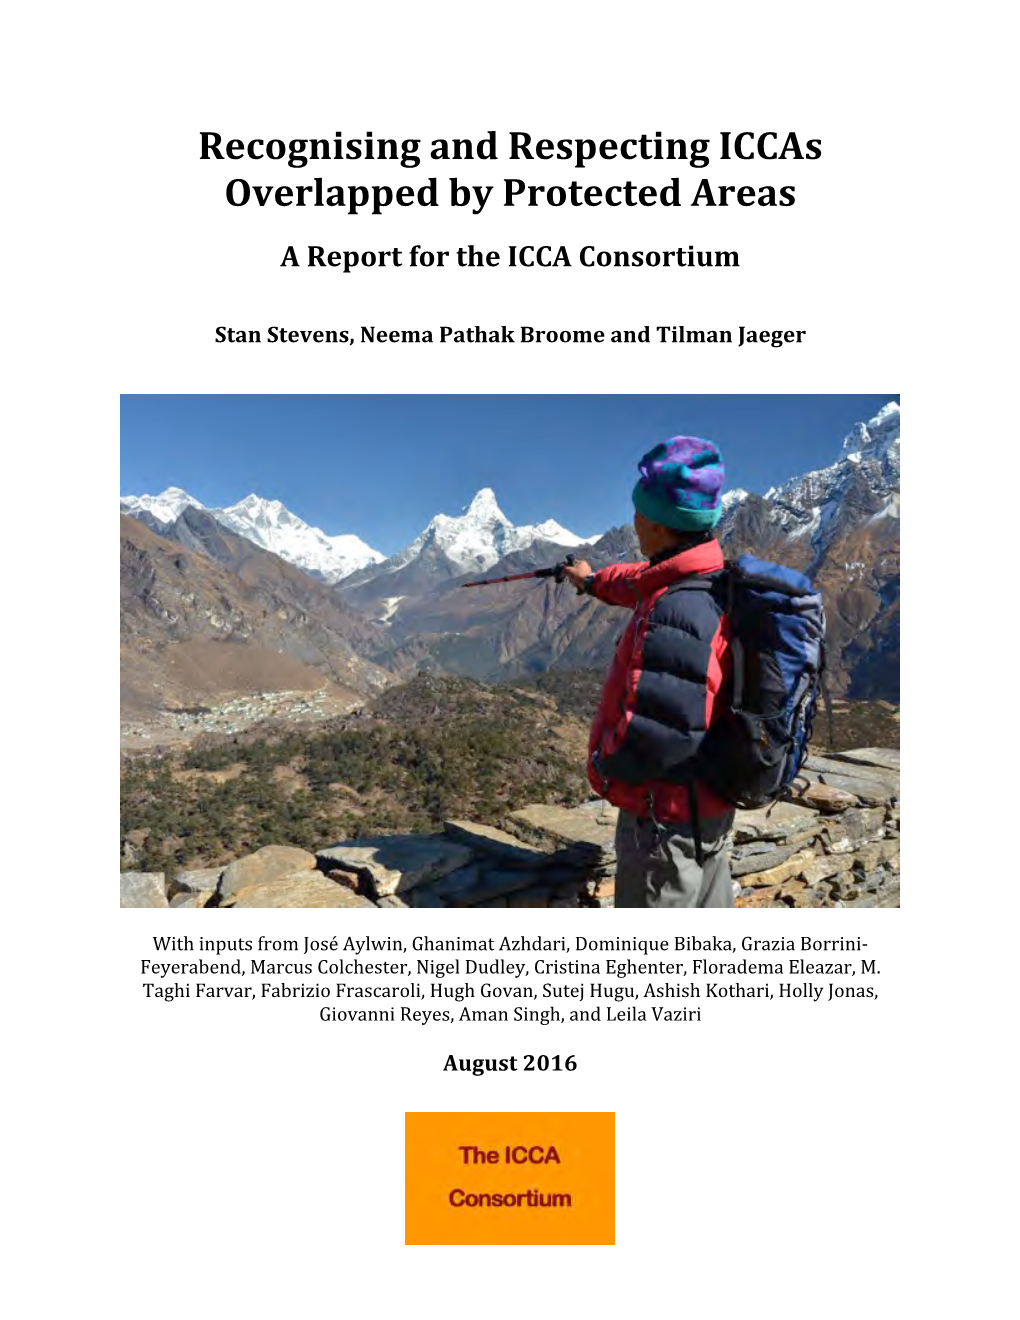 Recognising and Respecting Iccas Overlapped by Protected Areas